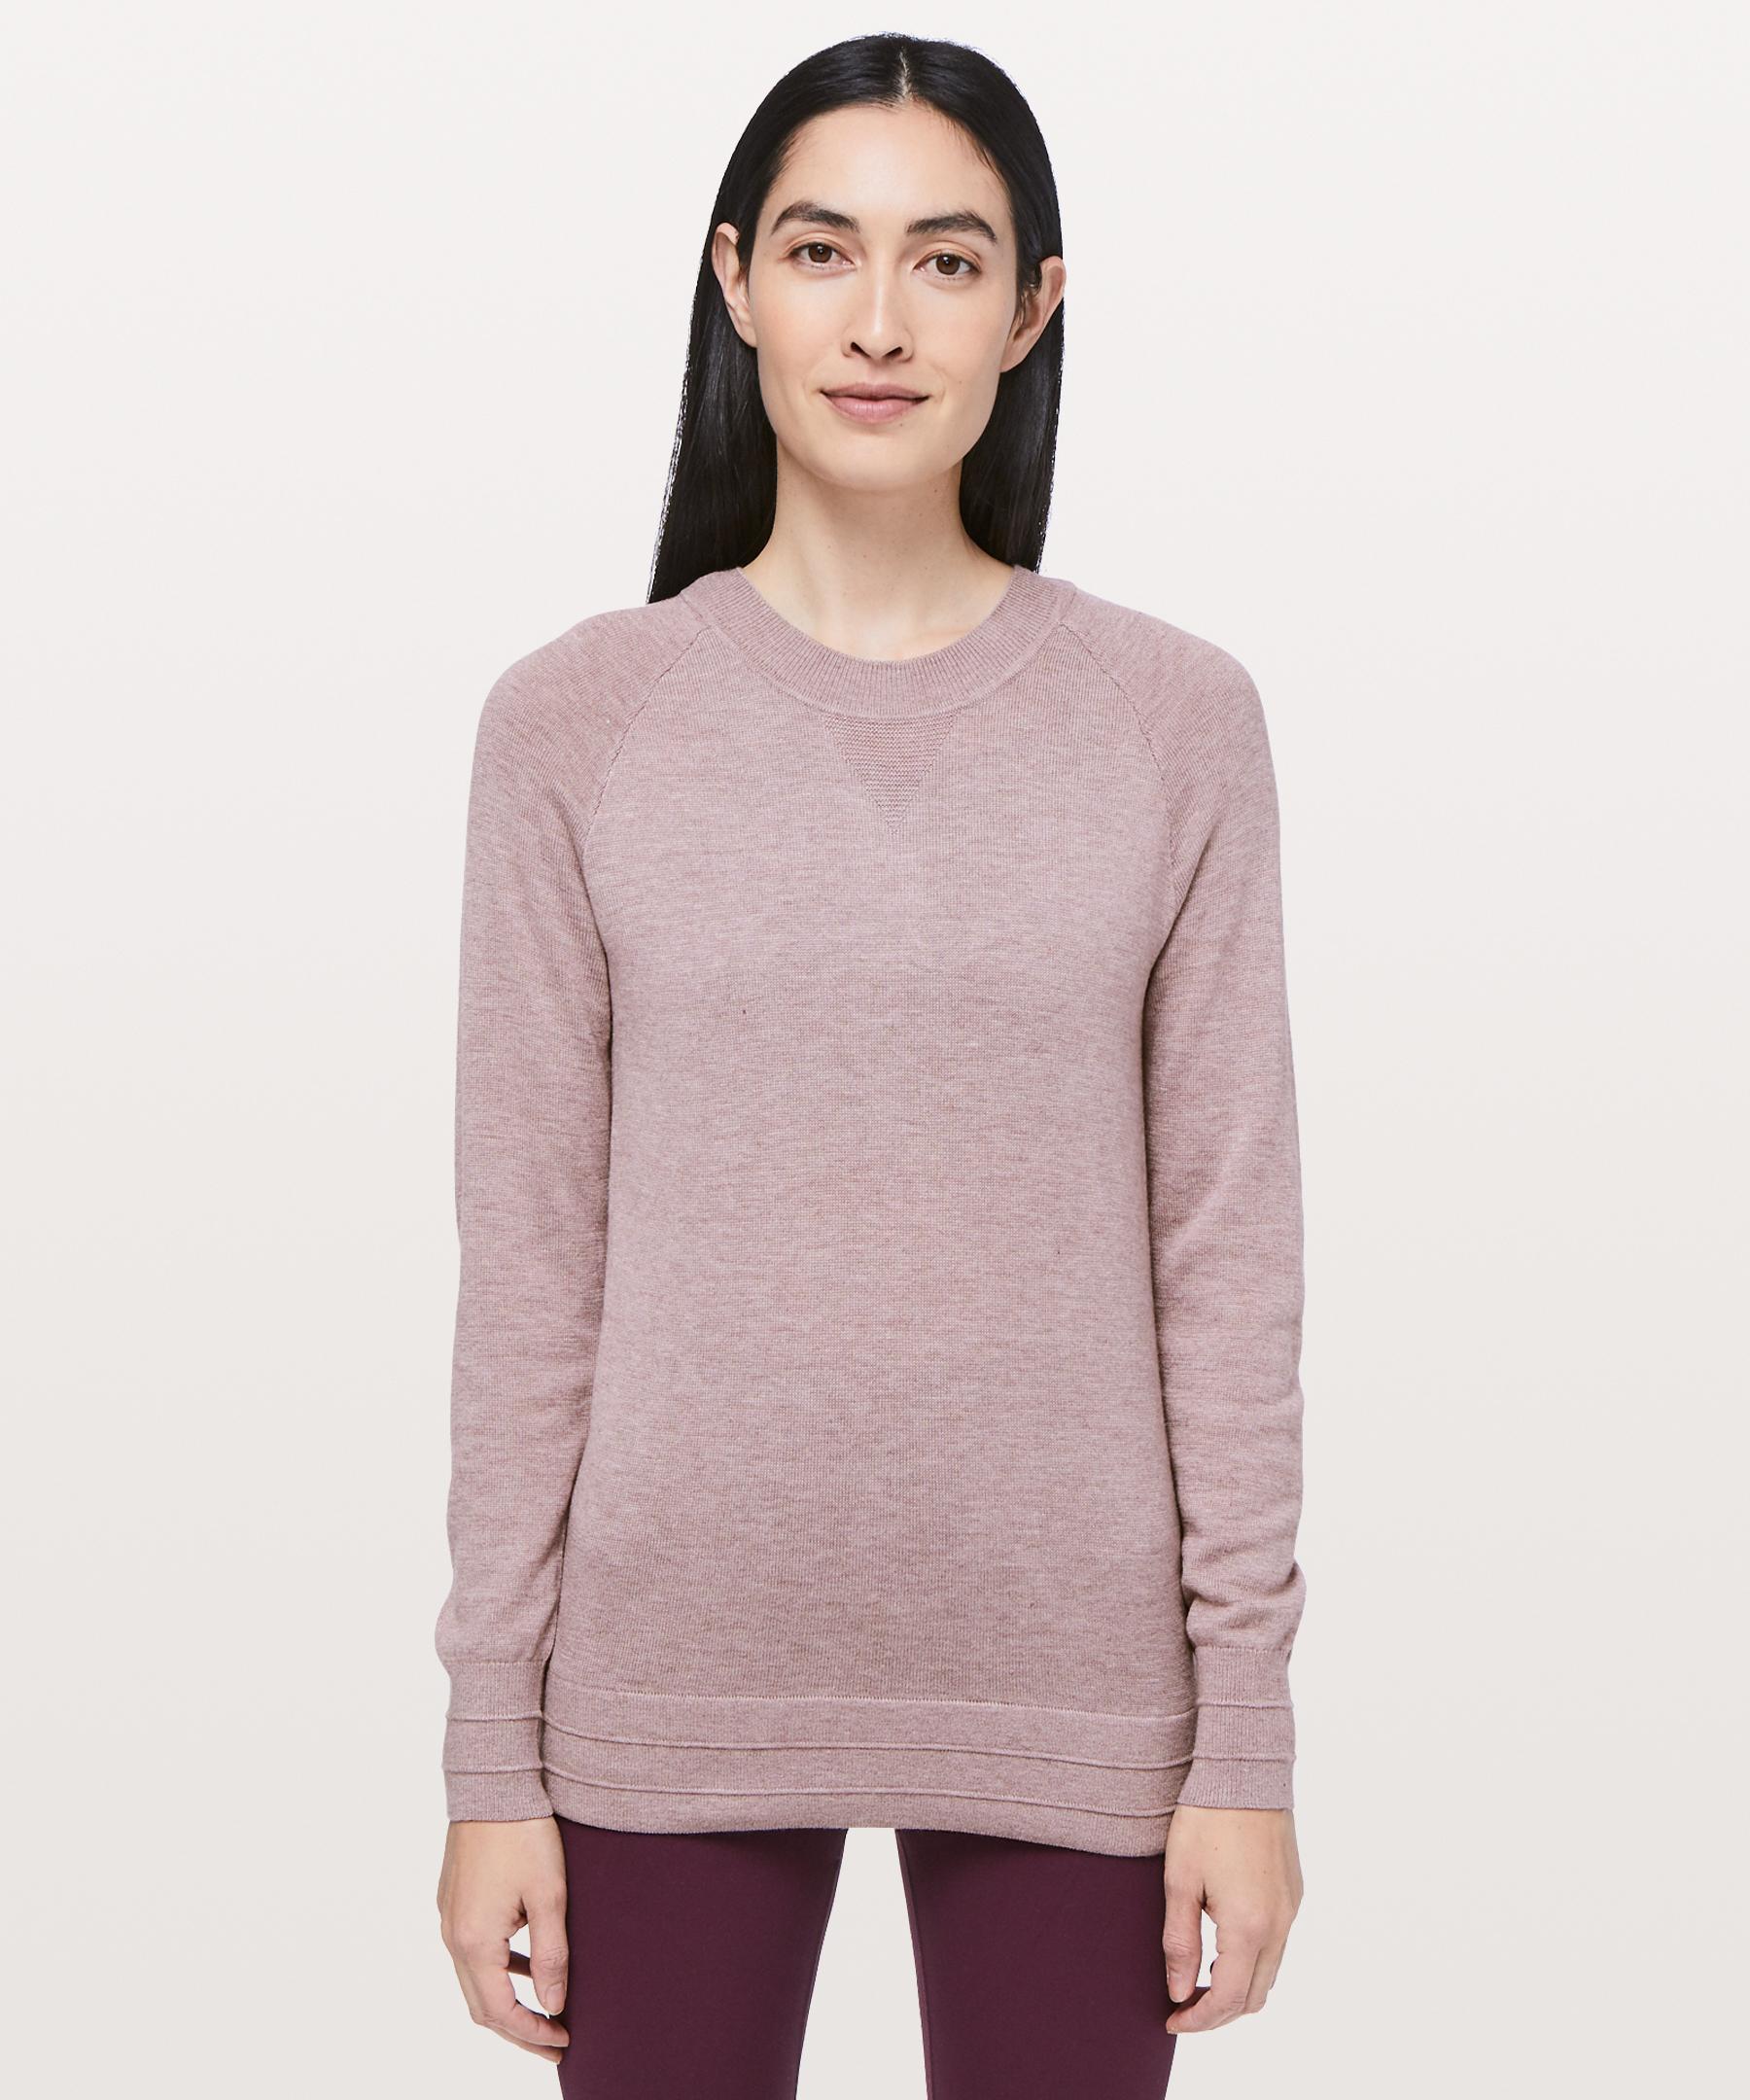 lululemon jumpers, OFF 71%,Cheap price!